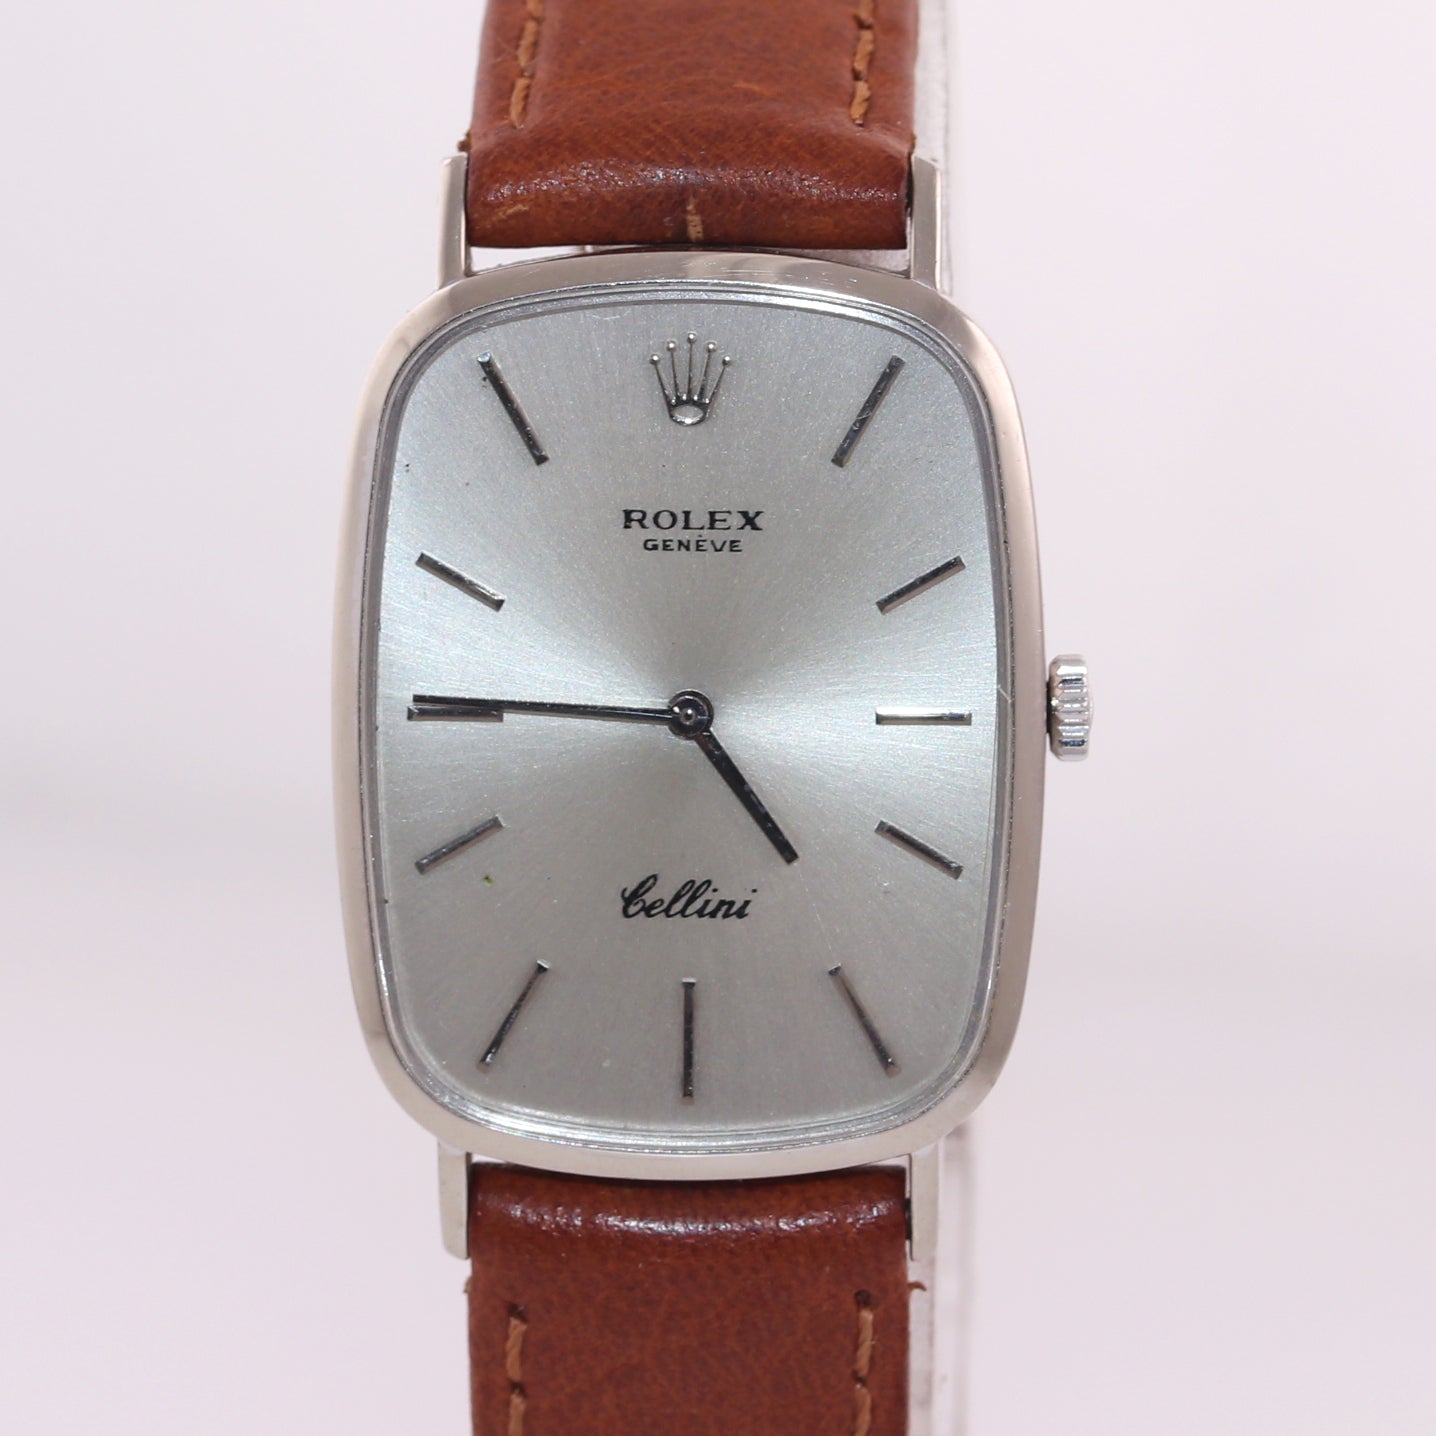 Rolex Cellini Cellini 4113 rectangular 18k White Gold Silver Dial Leather Watch